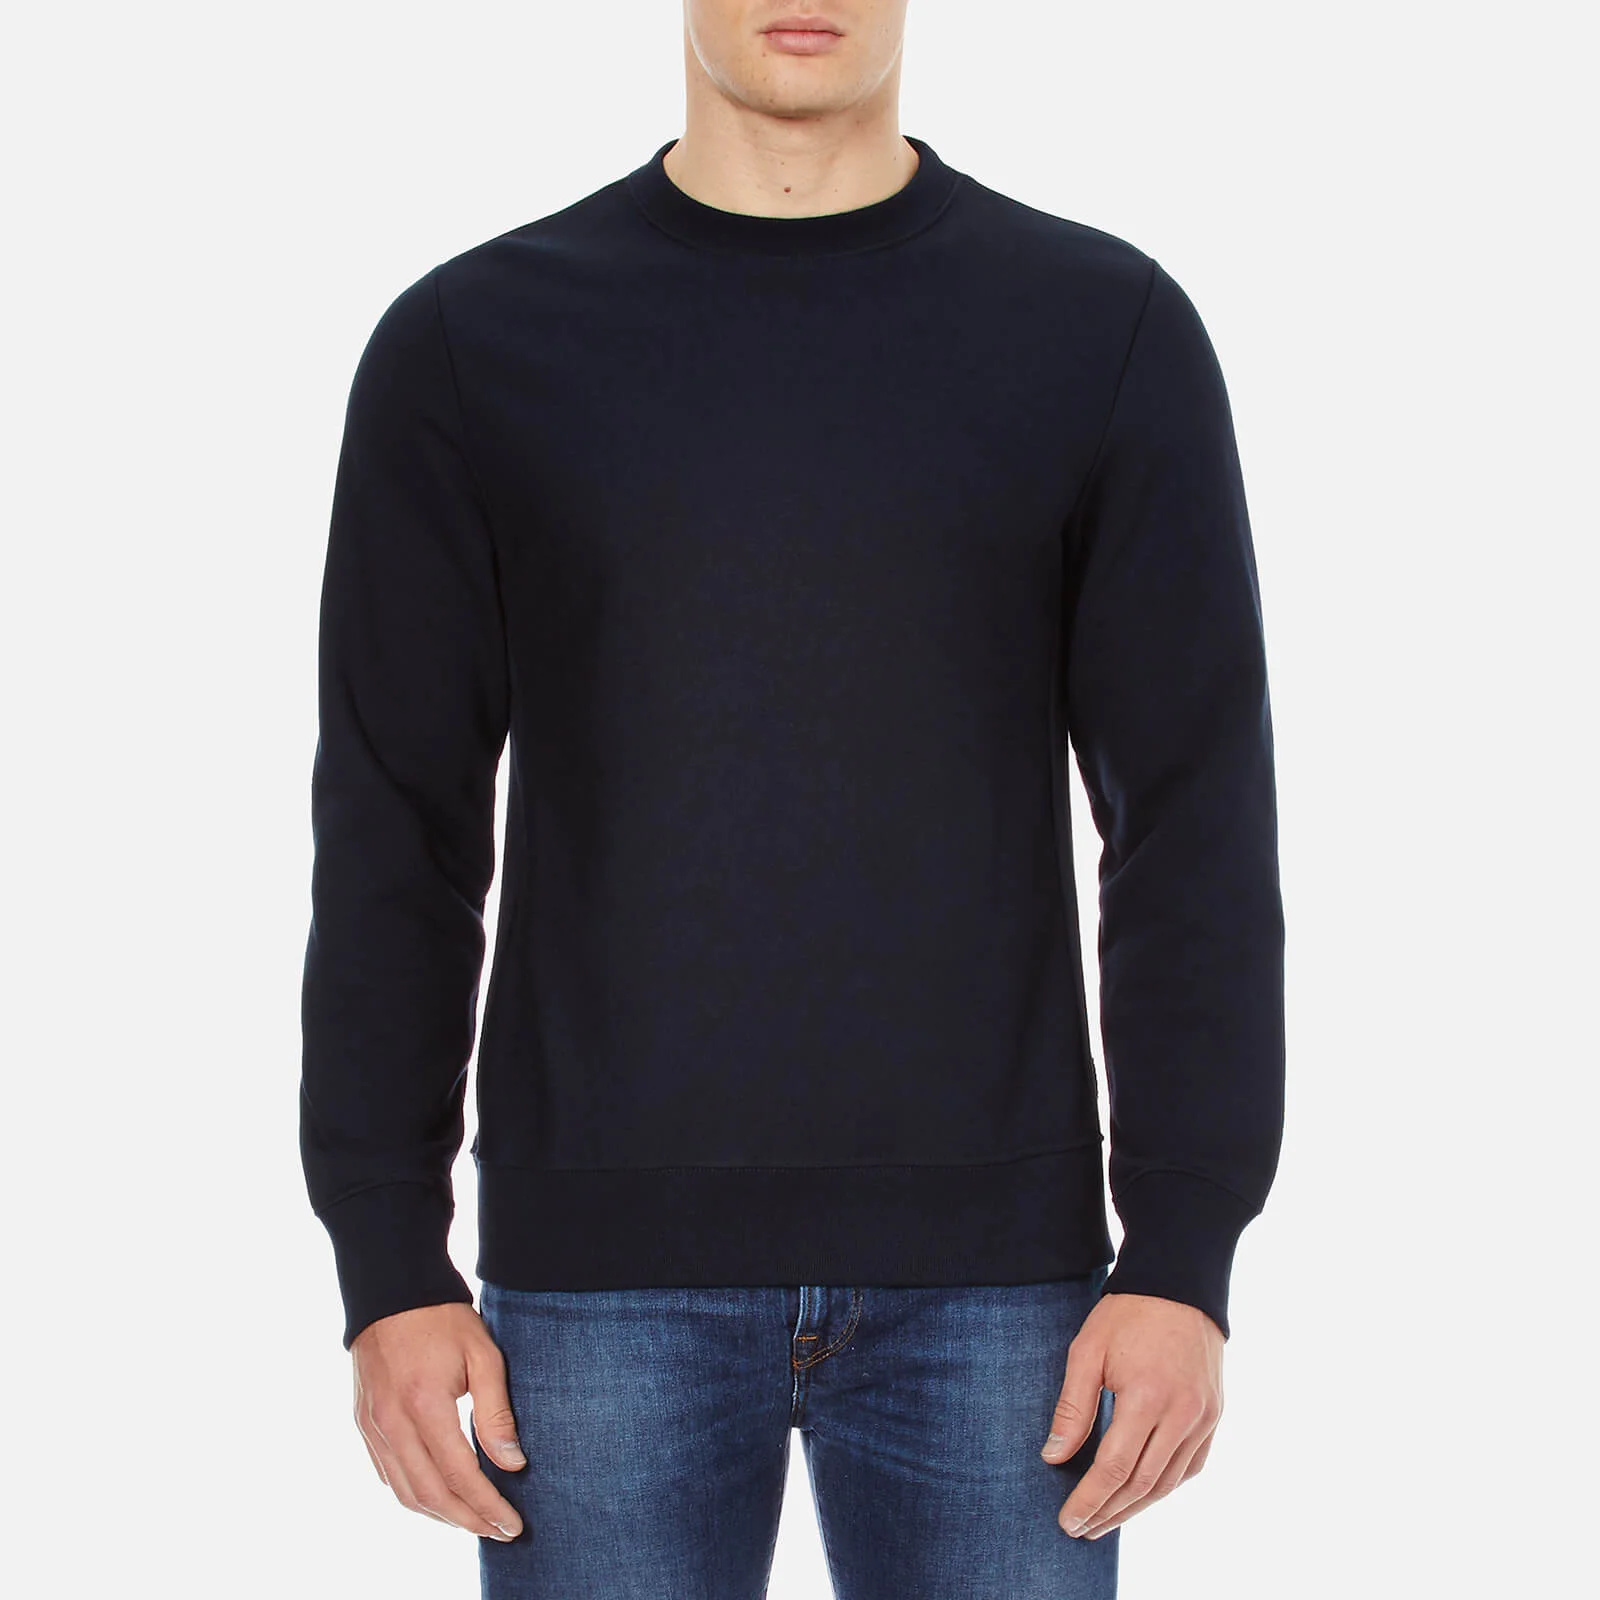 PS by Paul Smith Men's Cotton Sweater - Navy Image 1